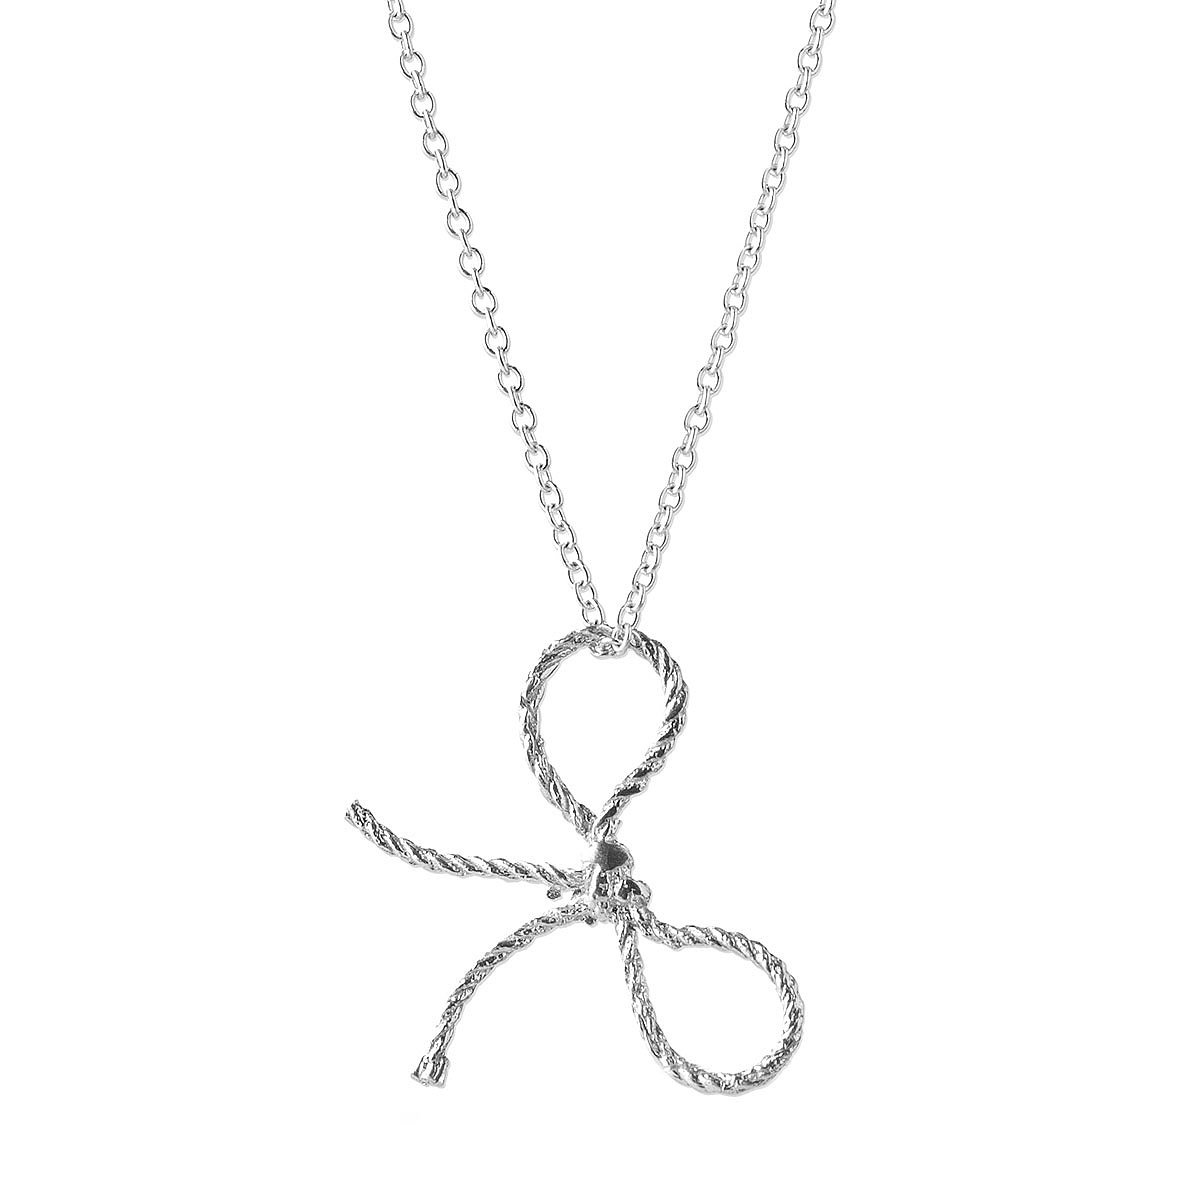 Forget Me Not Necklaces | Knot, Bow, Ribbon, Kiel Mead | UncommonGoods